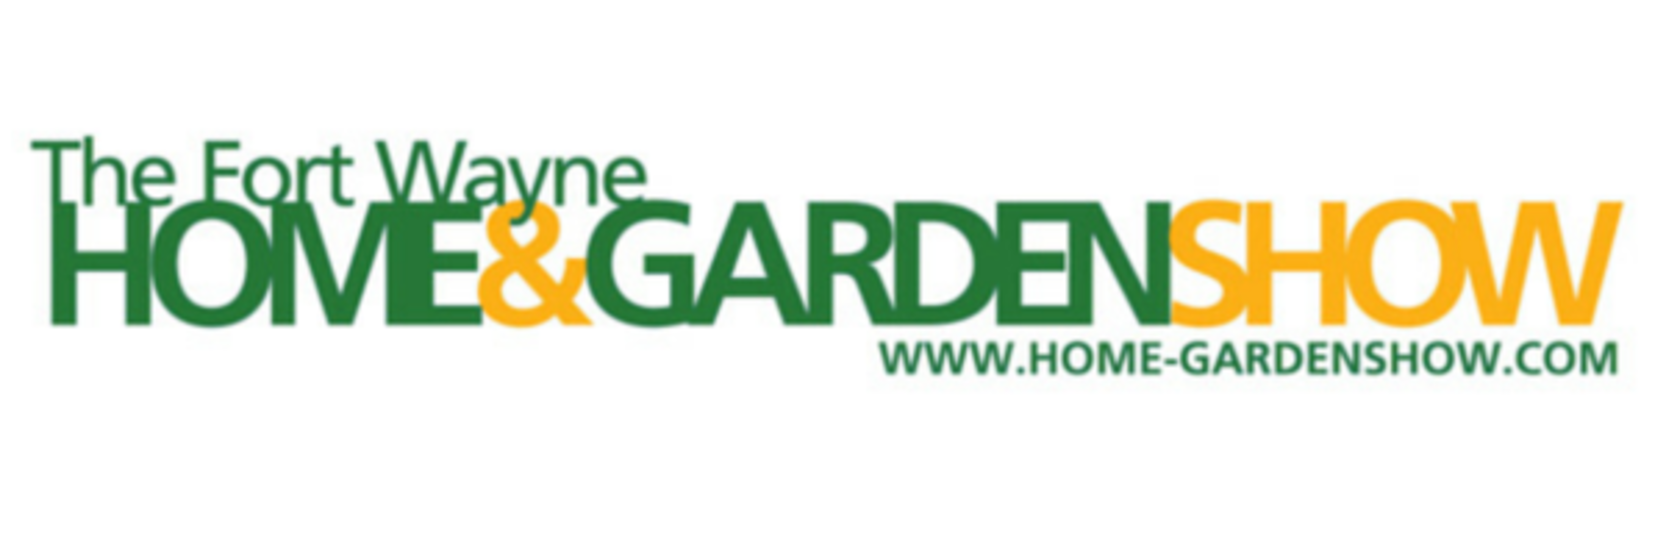 Fort Wayne Home Garden Show Returns For Its 42nd Year And You